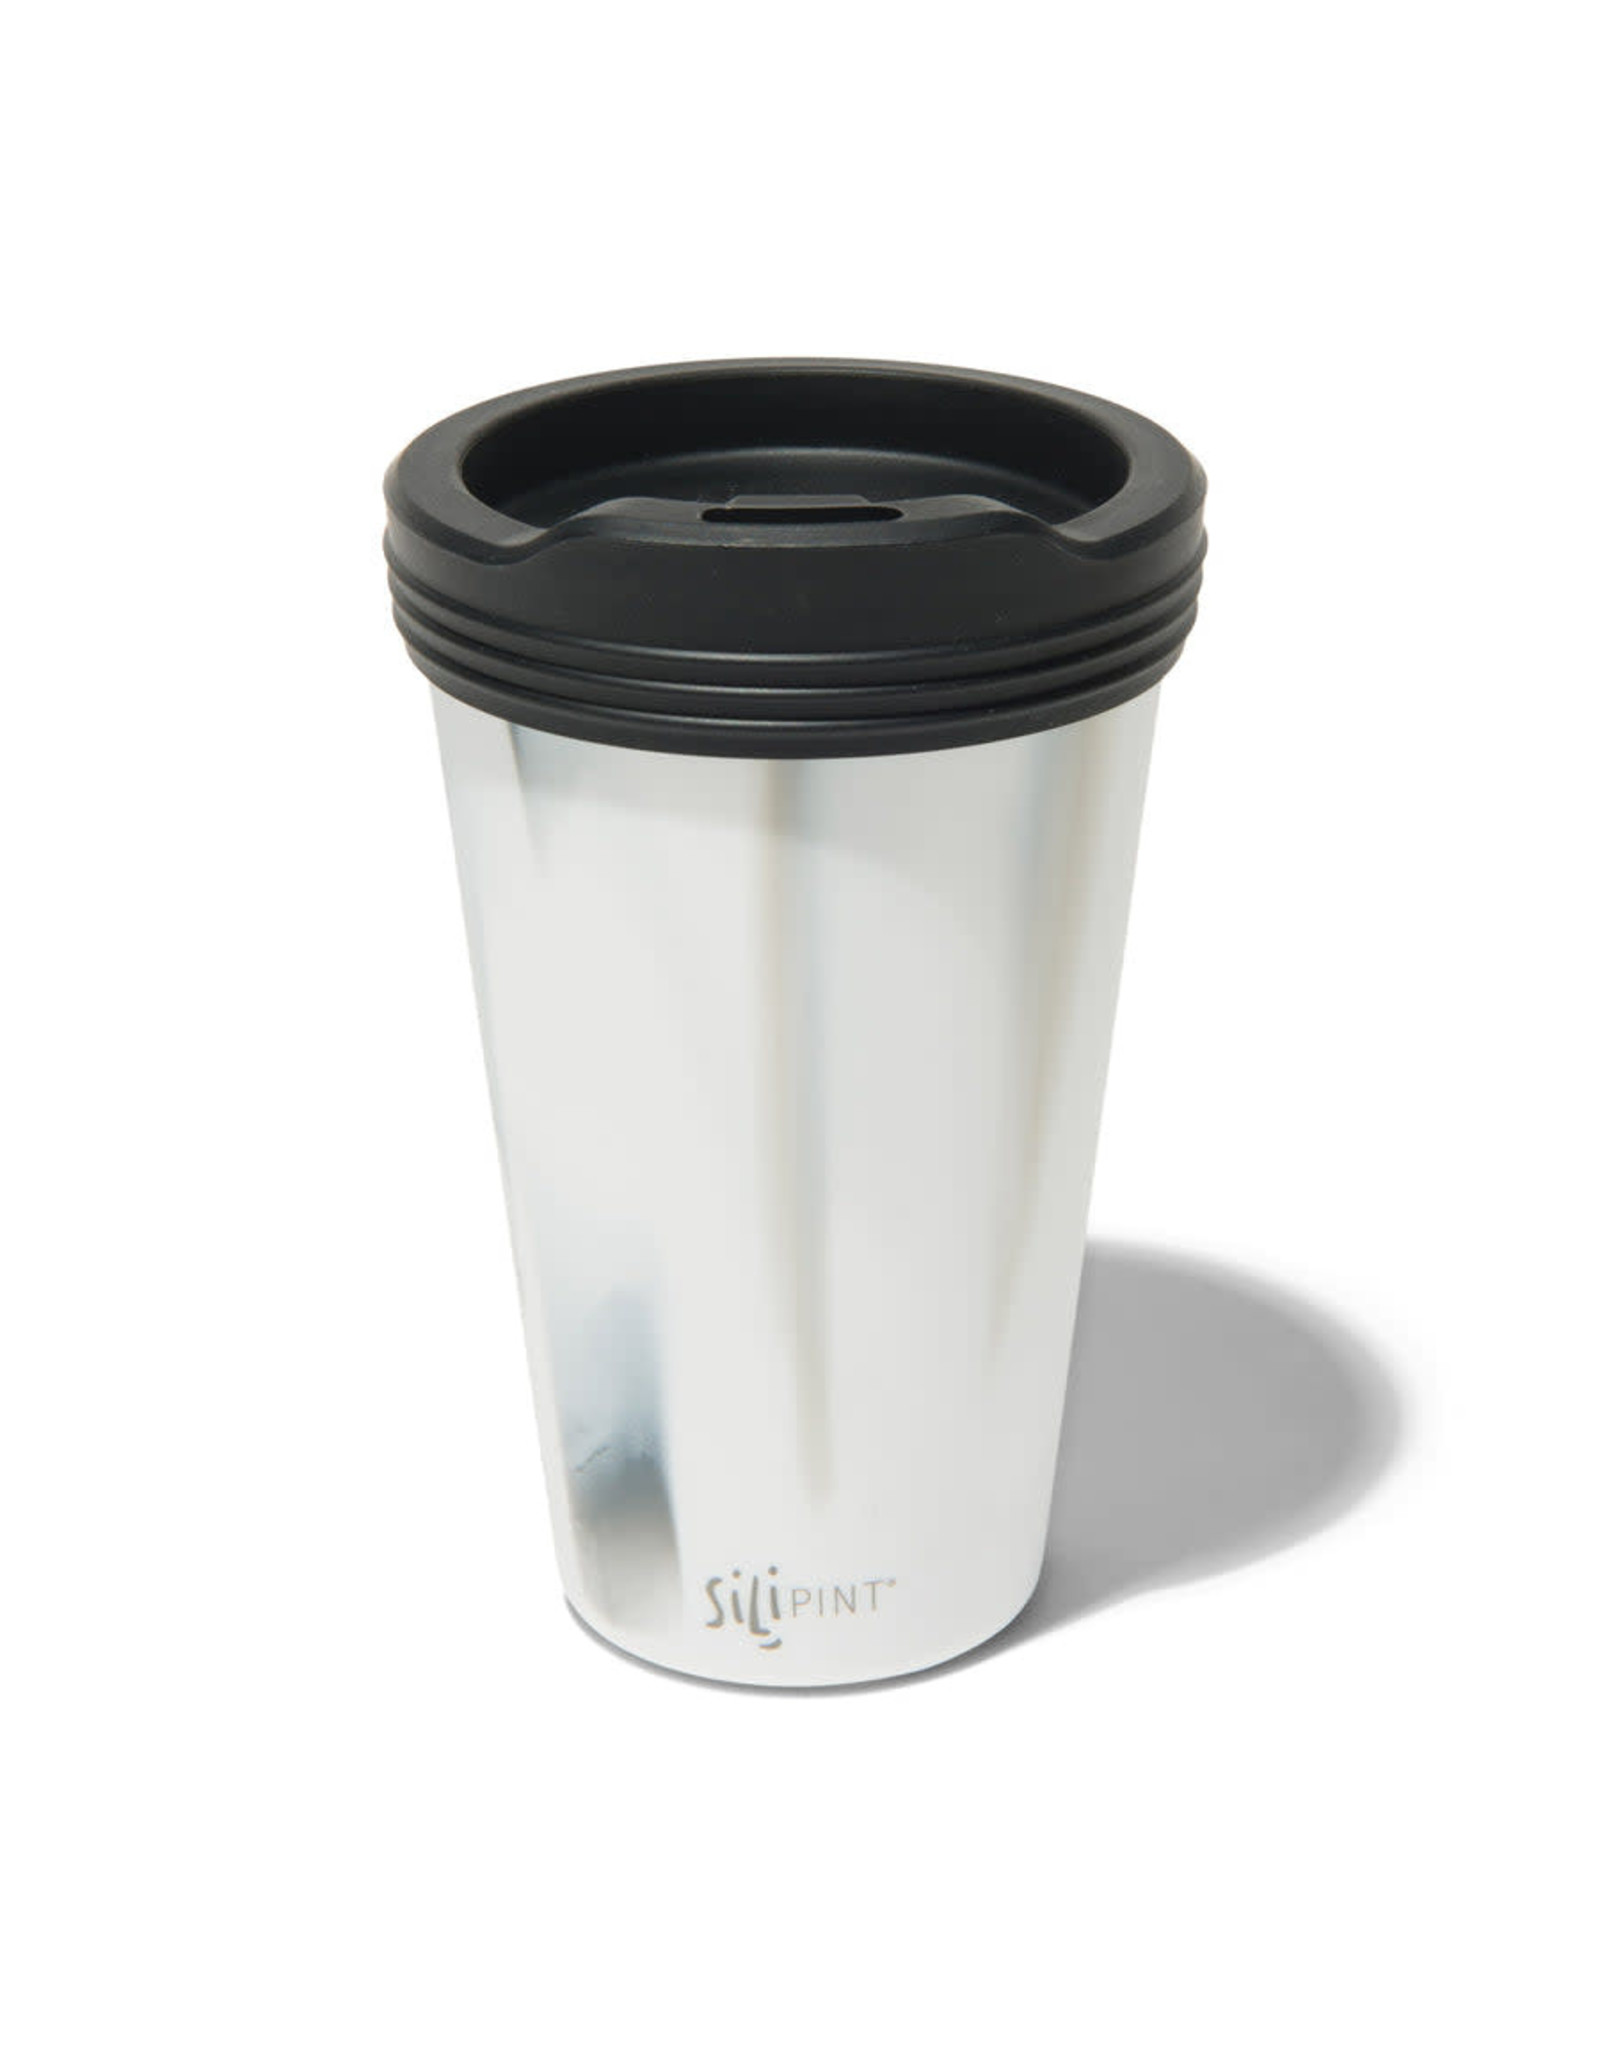 SiliPINT Silicone Lid And Straw Set For 16oz / 22oz Tumblers | Black